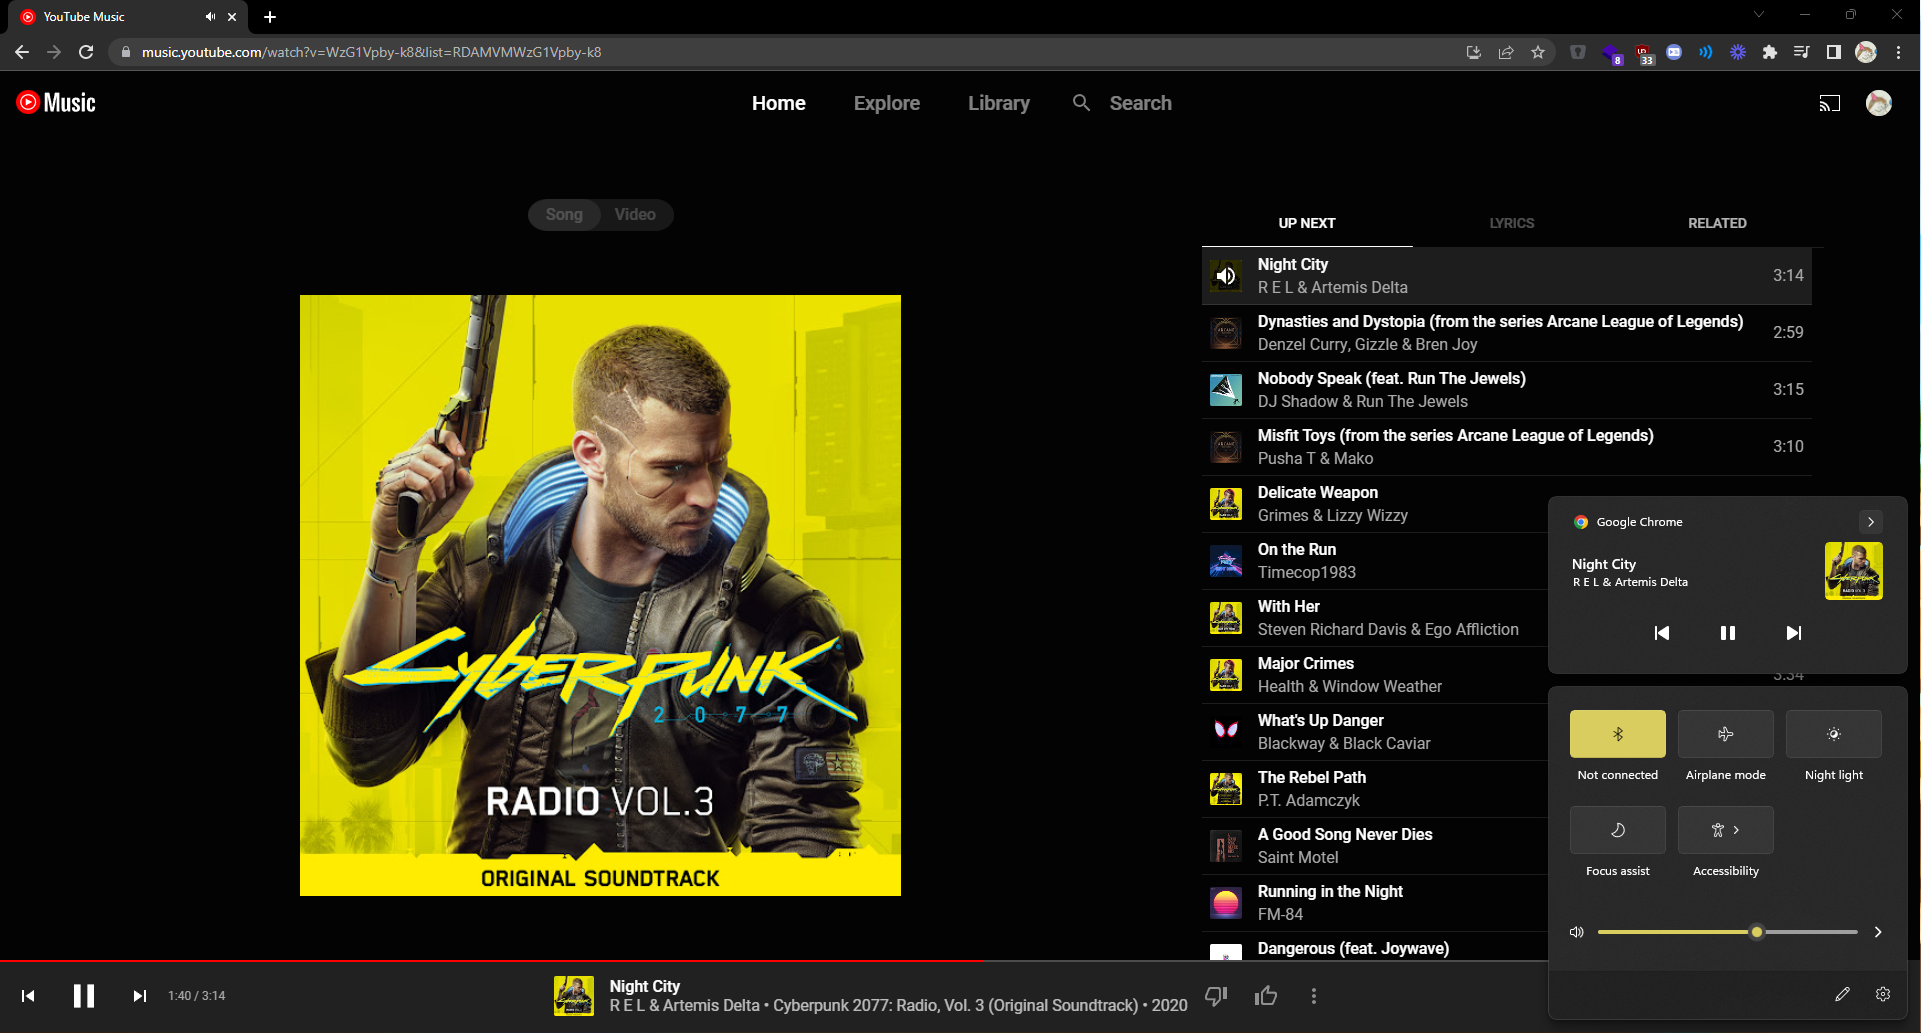 Accessing controls and information for YouTube Music via the Window’s Taskbar.